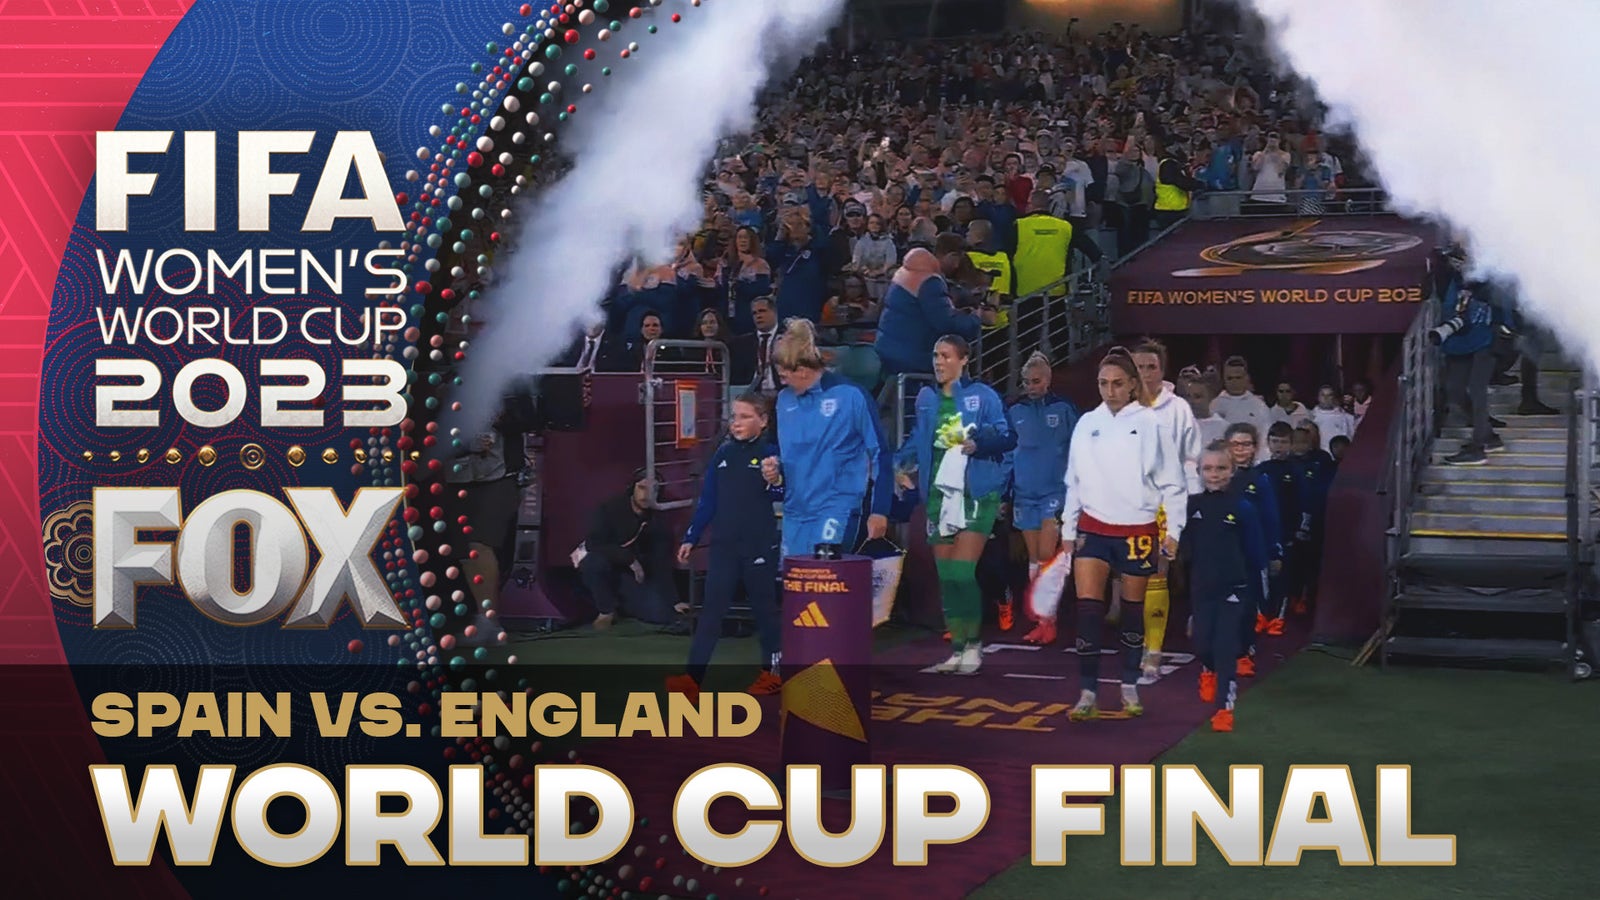 Spain and England walk outs, national anthems at Women's World Cup final